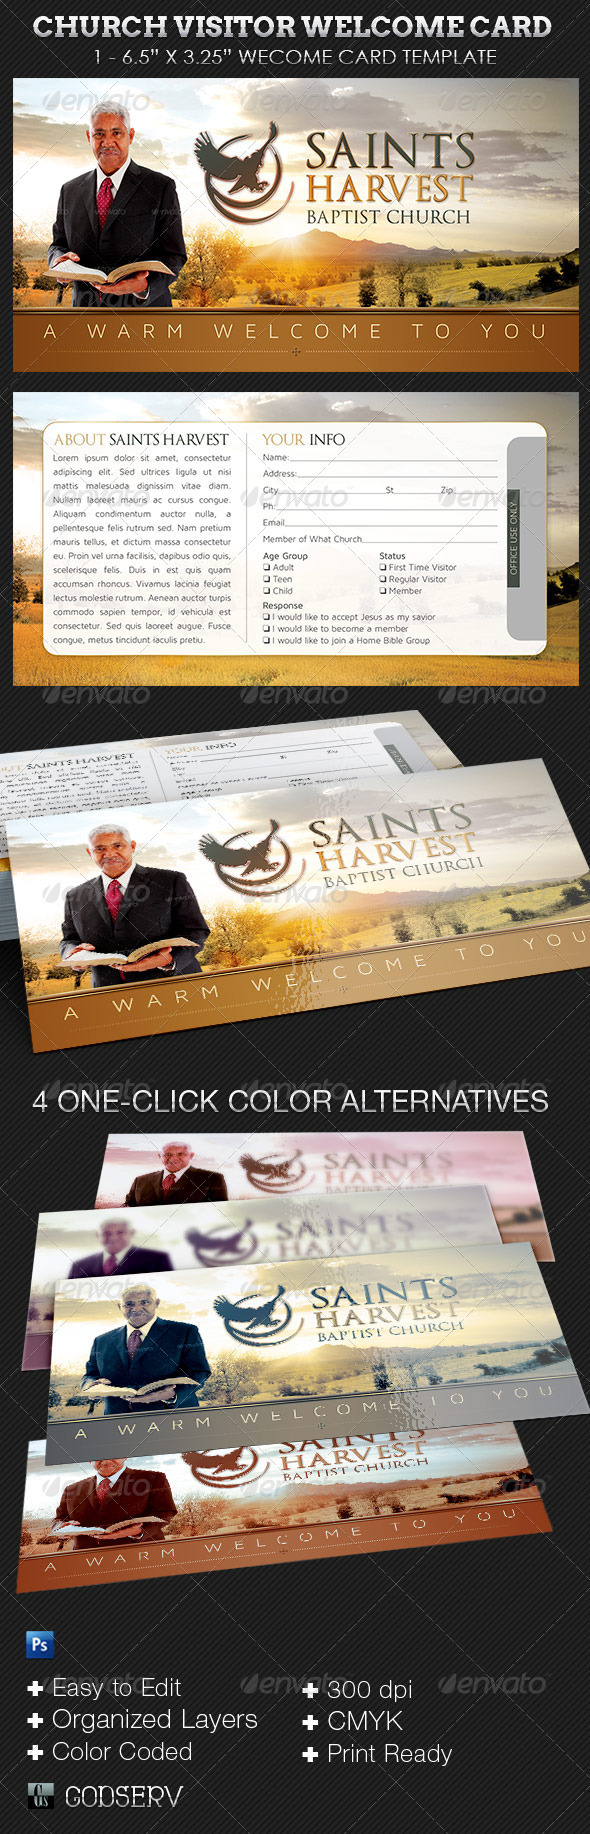 Church Visitor Welcome Card Template on Behance Within Church Visitor Card Template Word